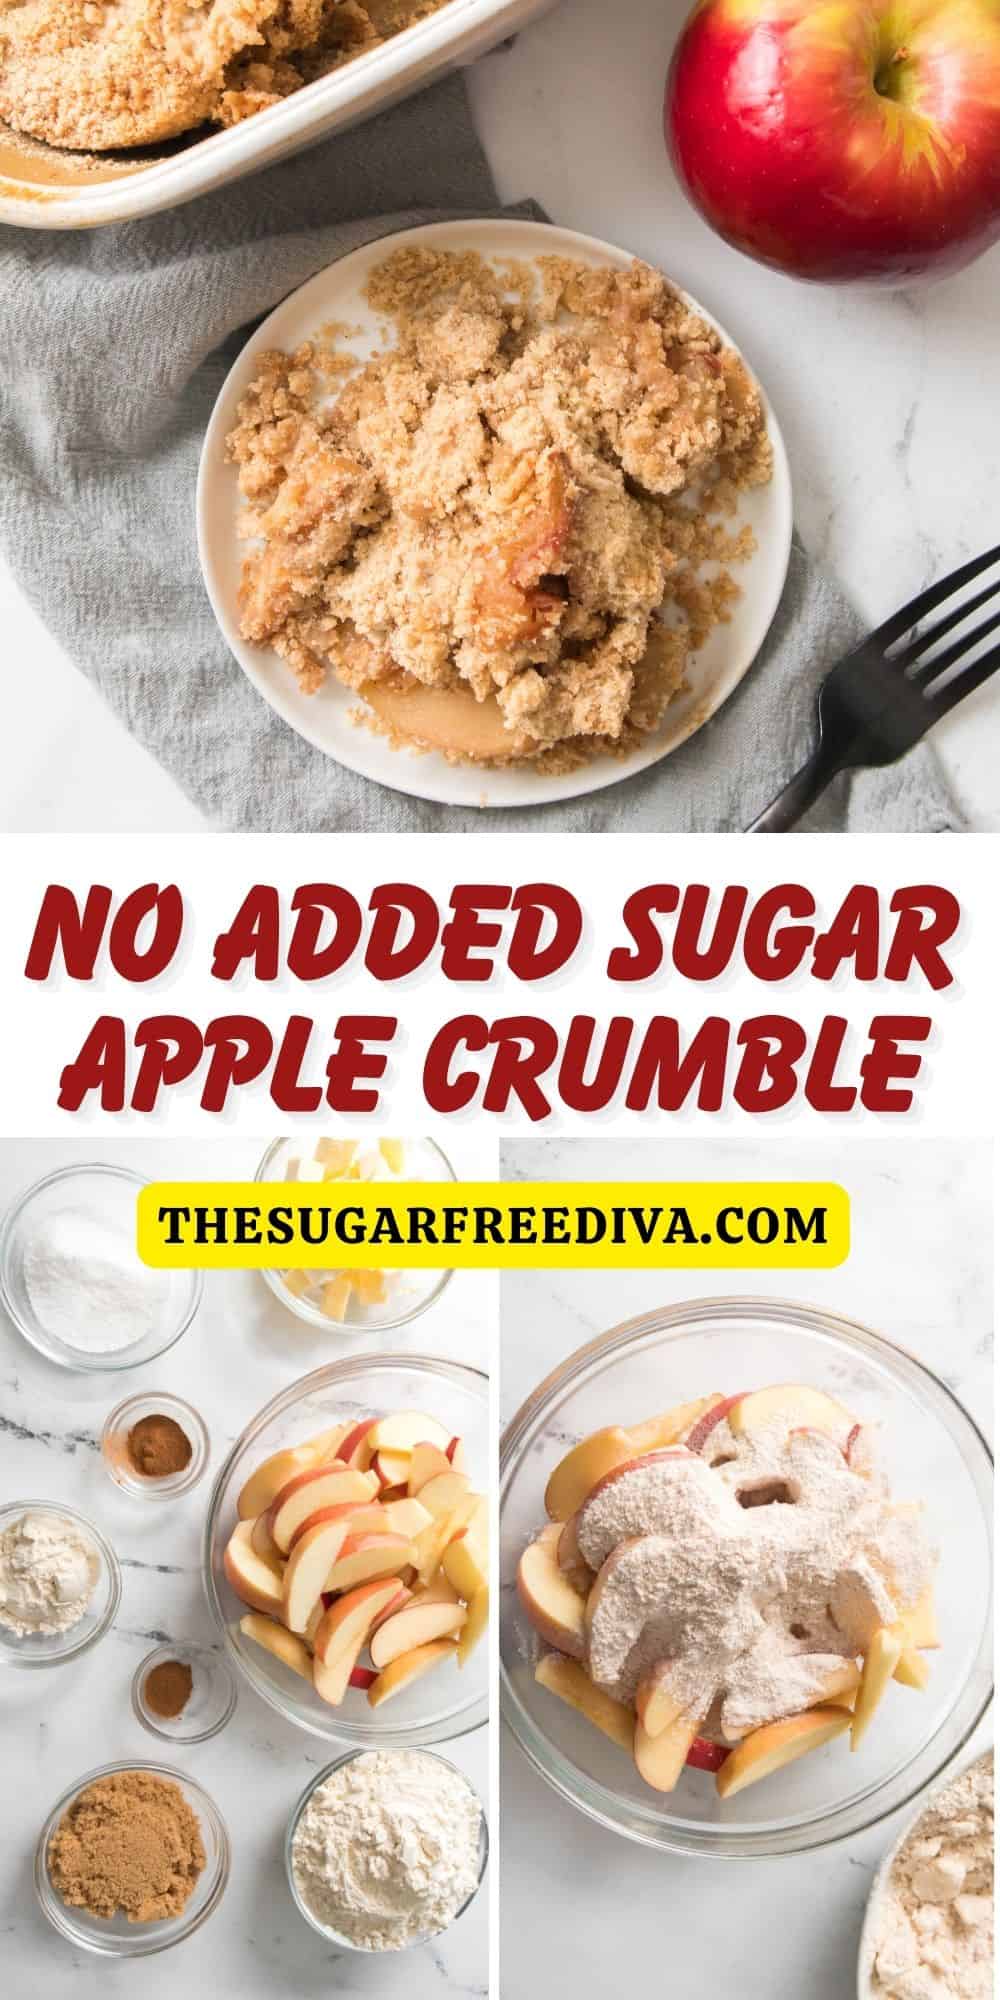 No Added Sugar Apple Crumble, a simple and delicious classic fall dessert recipe made with no added sugar. Includes lower carb and gluten free options.